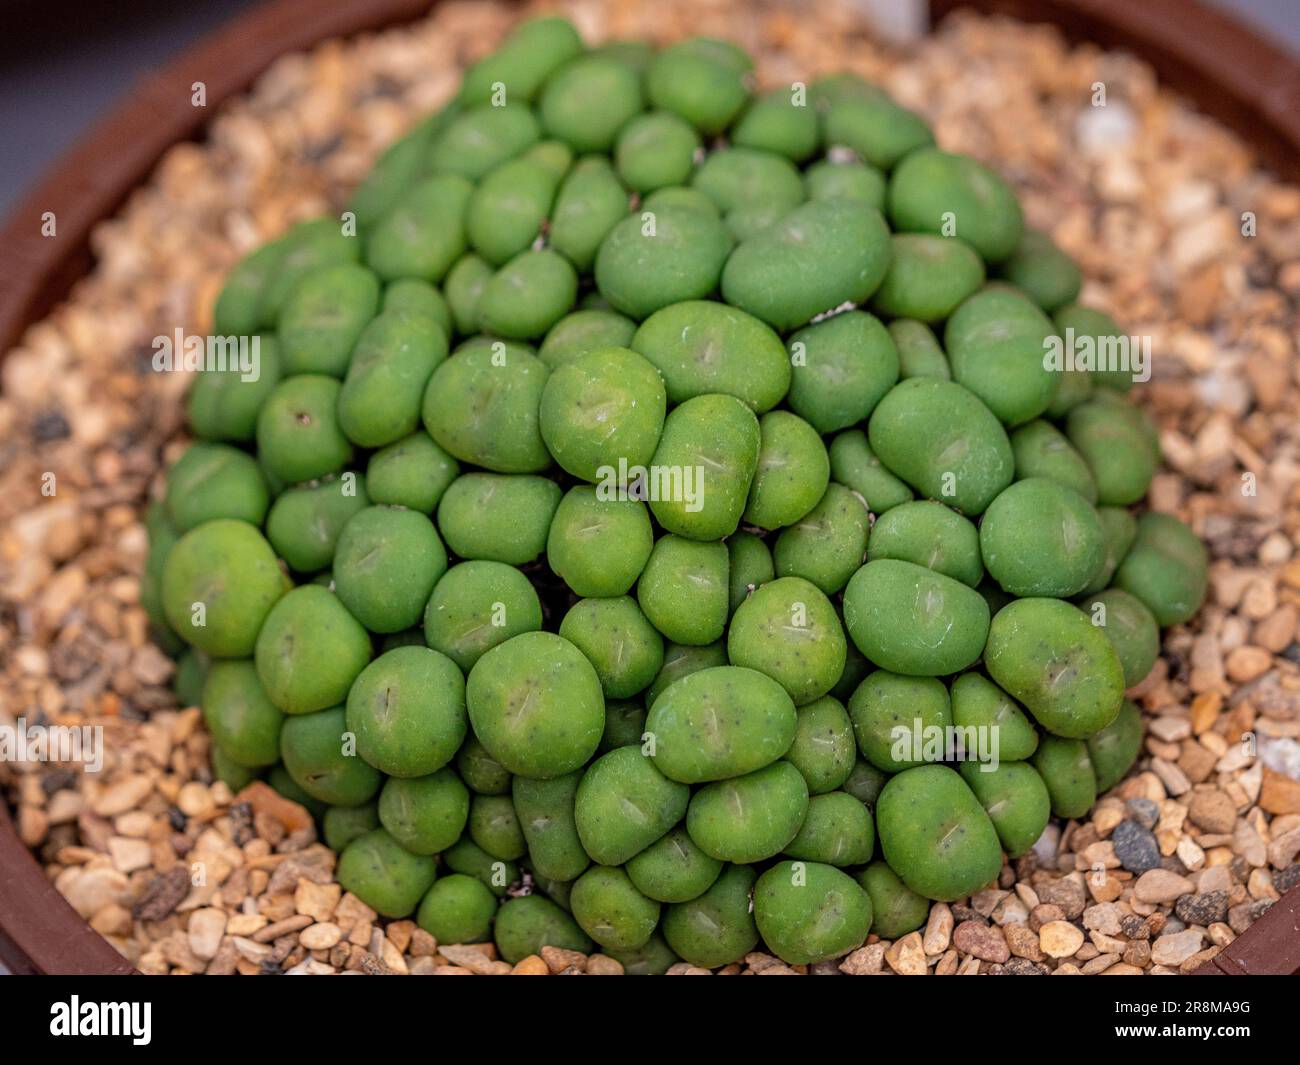 close-up of Conophytum minutum var. pearsonii commonly called Living Pebbles growing in a pot. Stock Photo